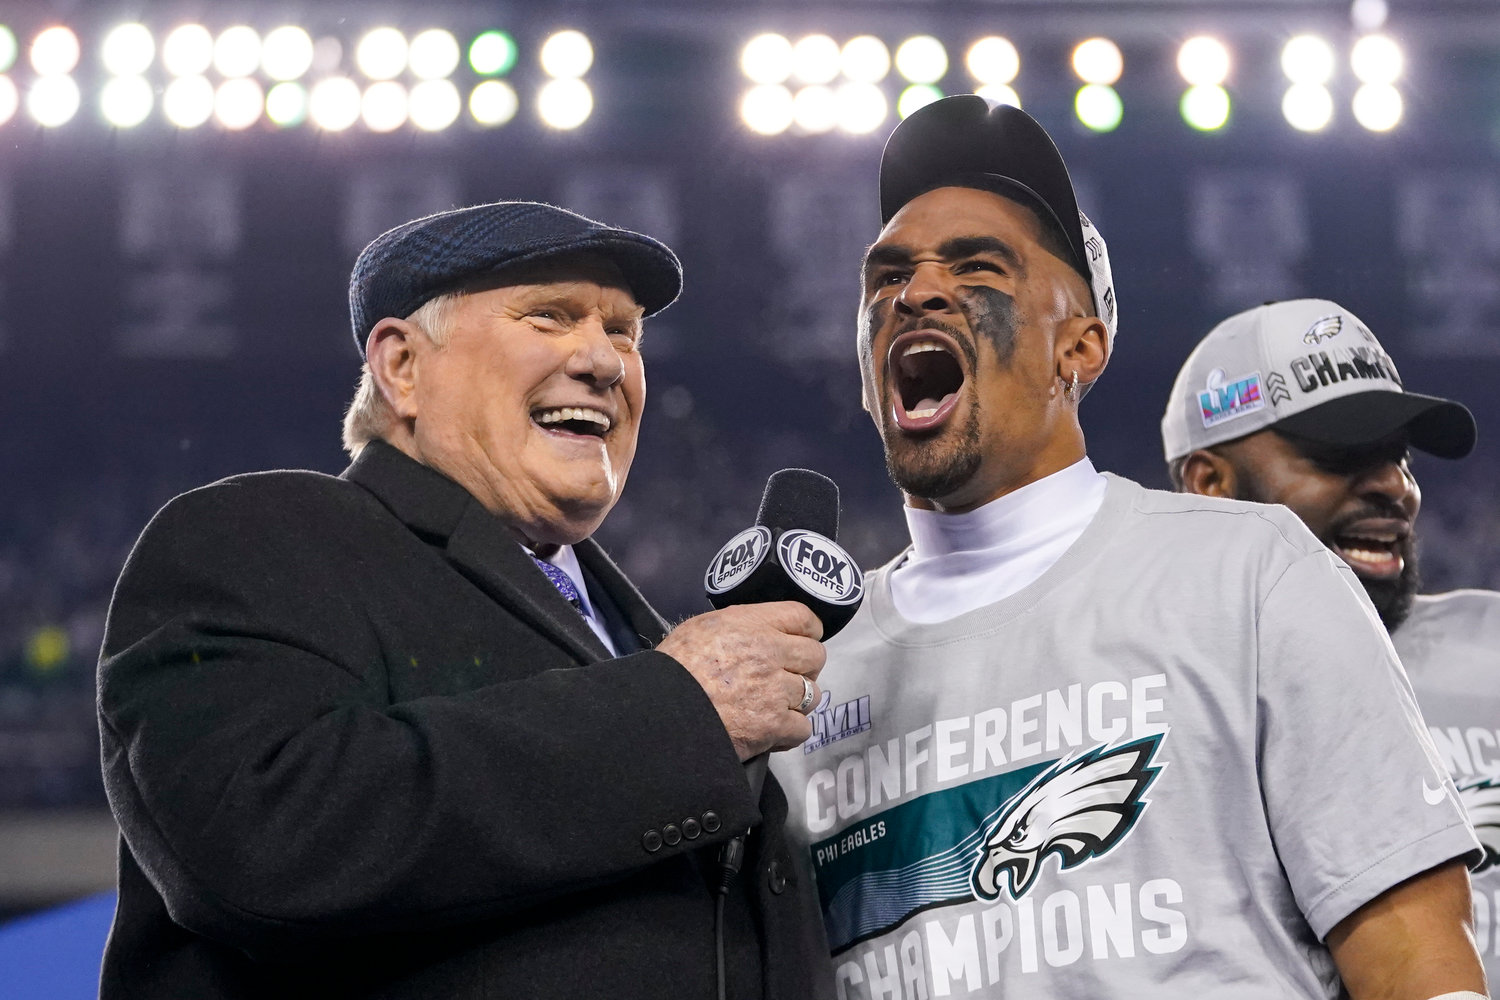 Philadelphia Eagles quarterback Jalen Hurts, center, reacts while speaking toTerry Bradshaw, left, after the NFC Championship NFL football game between the Philadelphia Eagles and the San Francisco 49ers on Sunday, Jan. 29, 2023, in Philadelphia. The Eagles won 31-7.